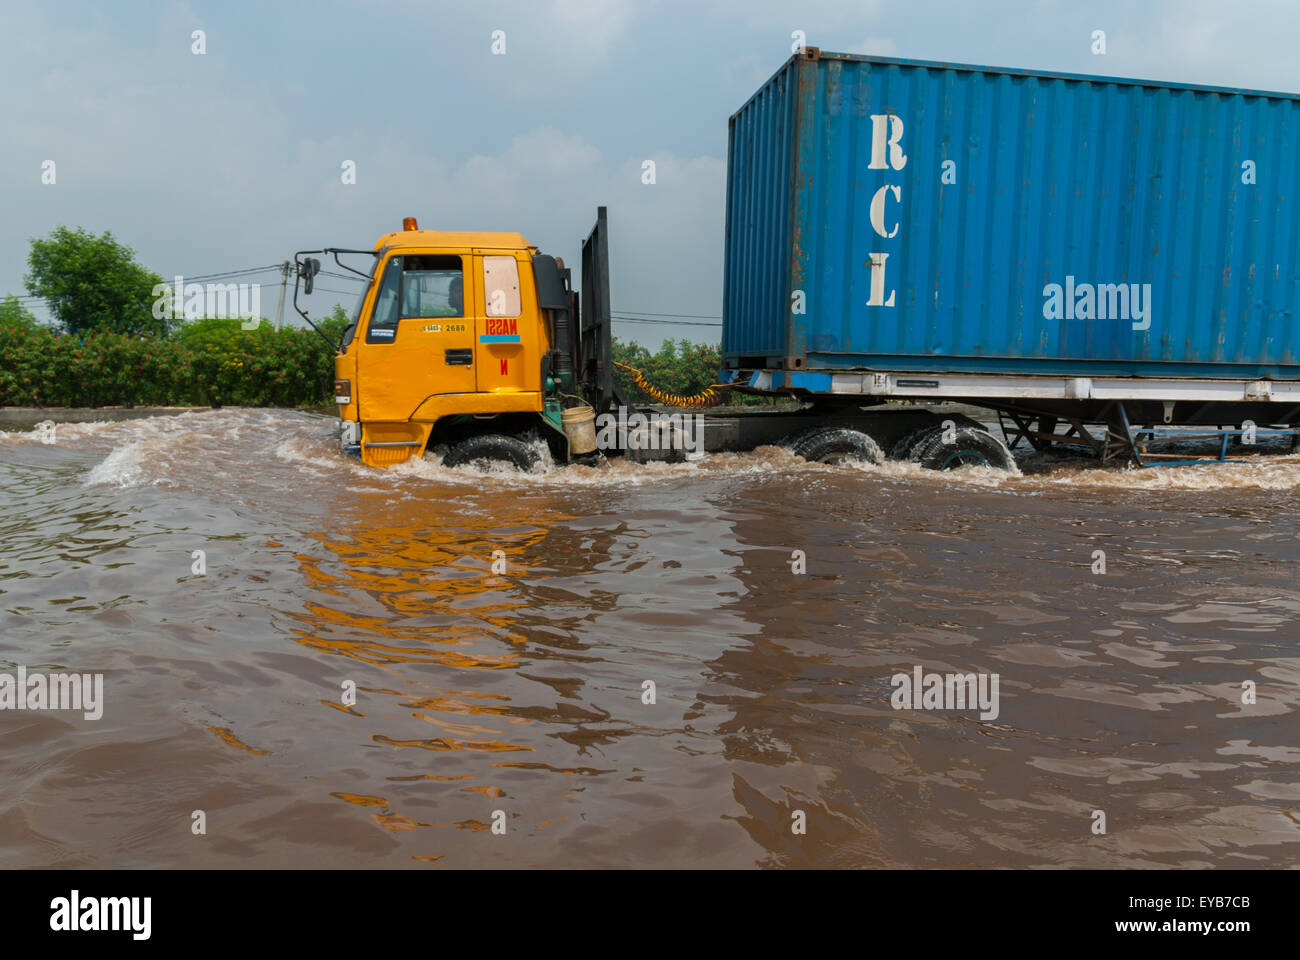 A container truck moving through floodwater on Prof. Dr. Ir. Soedijatmo Toll Road in Jakarta, Indonesia. Stock Photo